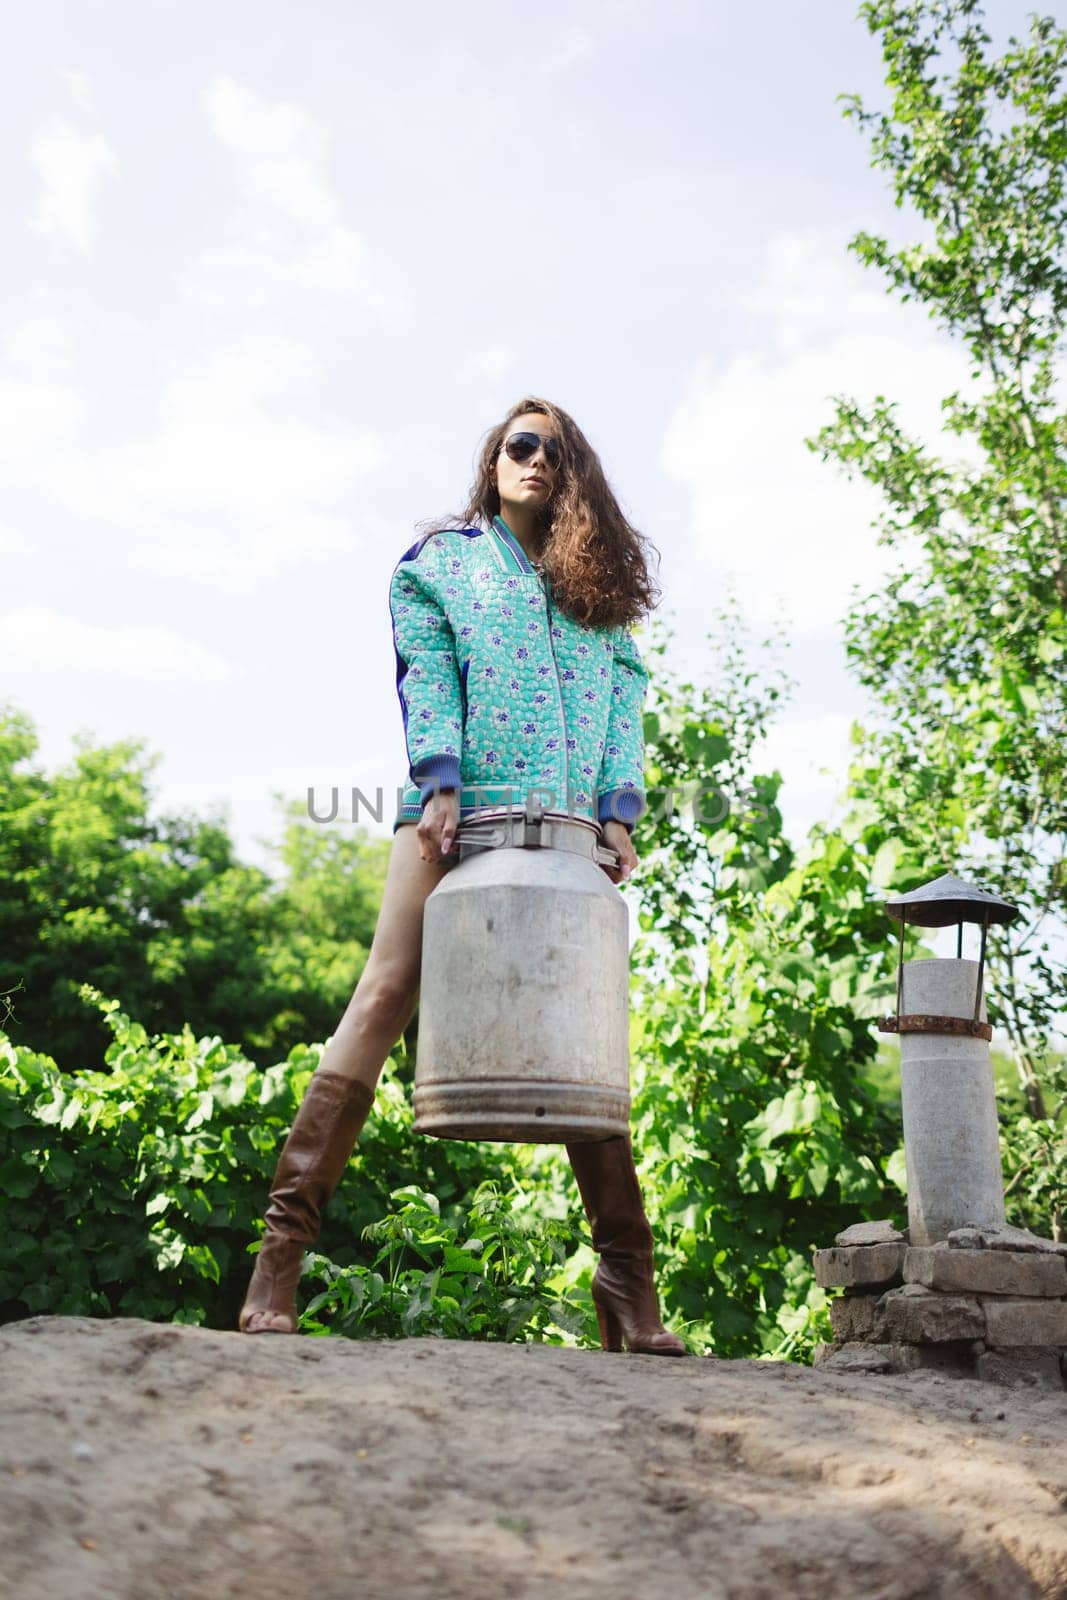 Young fashionable farmer woman posing on camera while holding milk can.